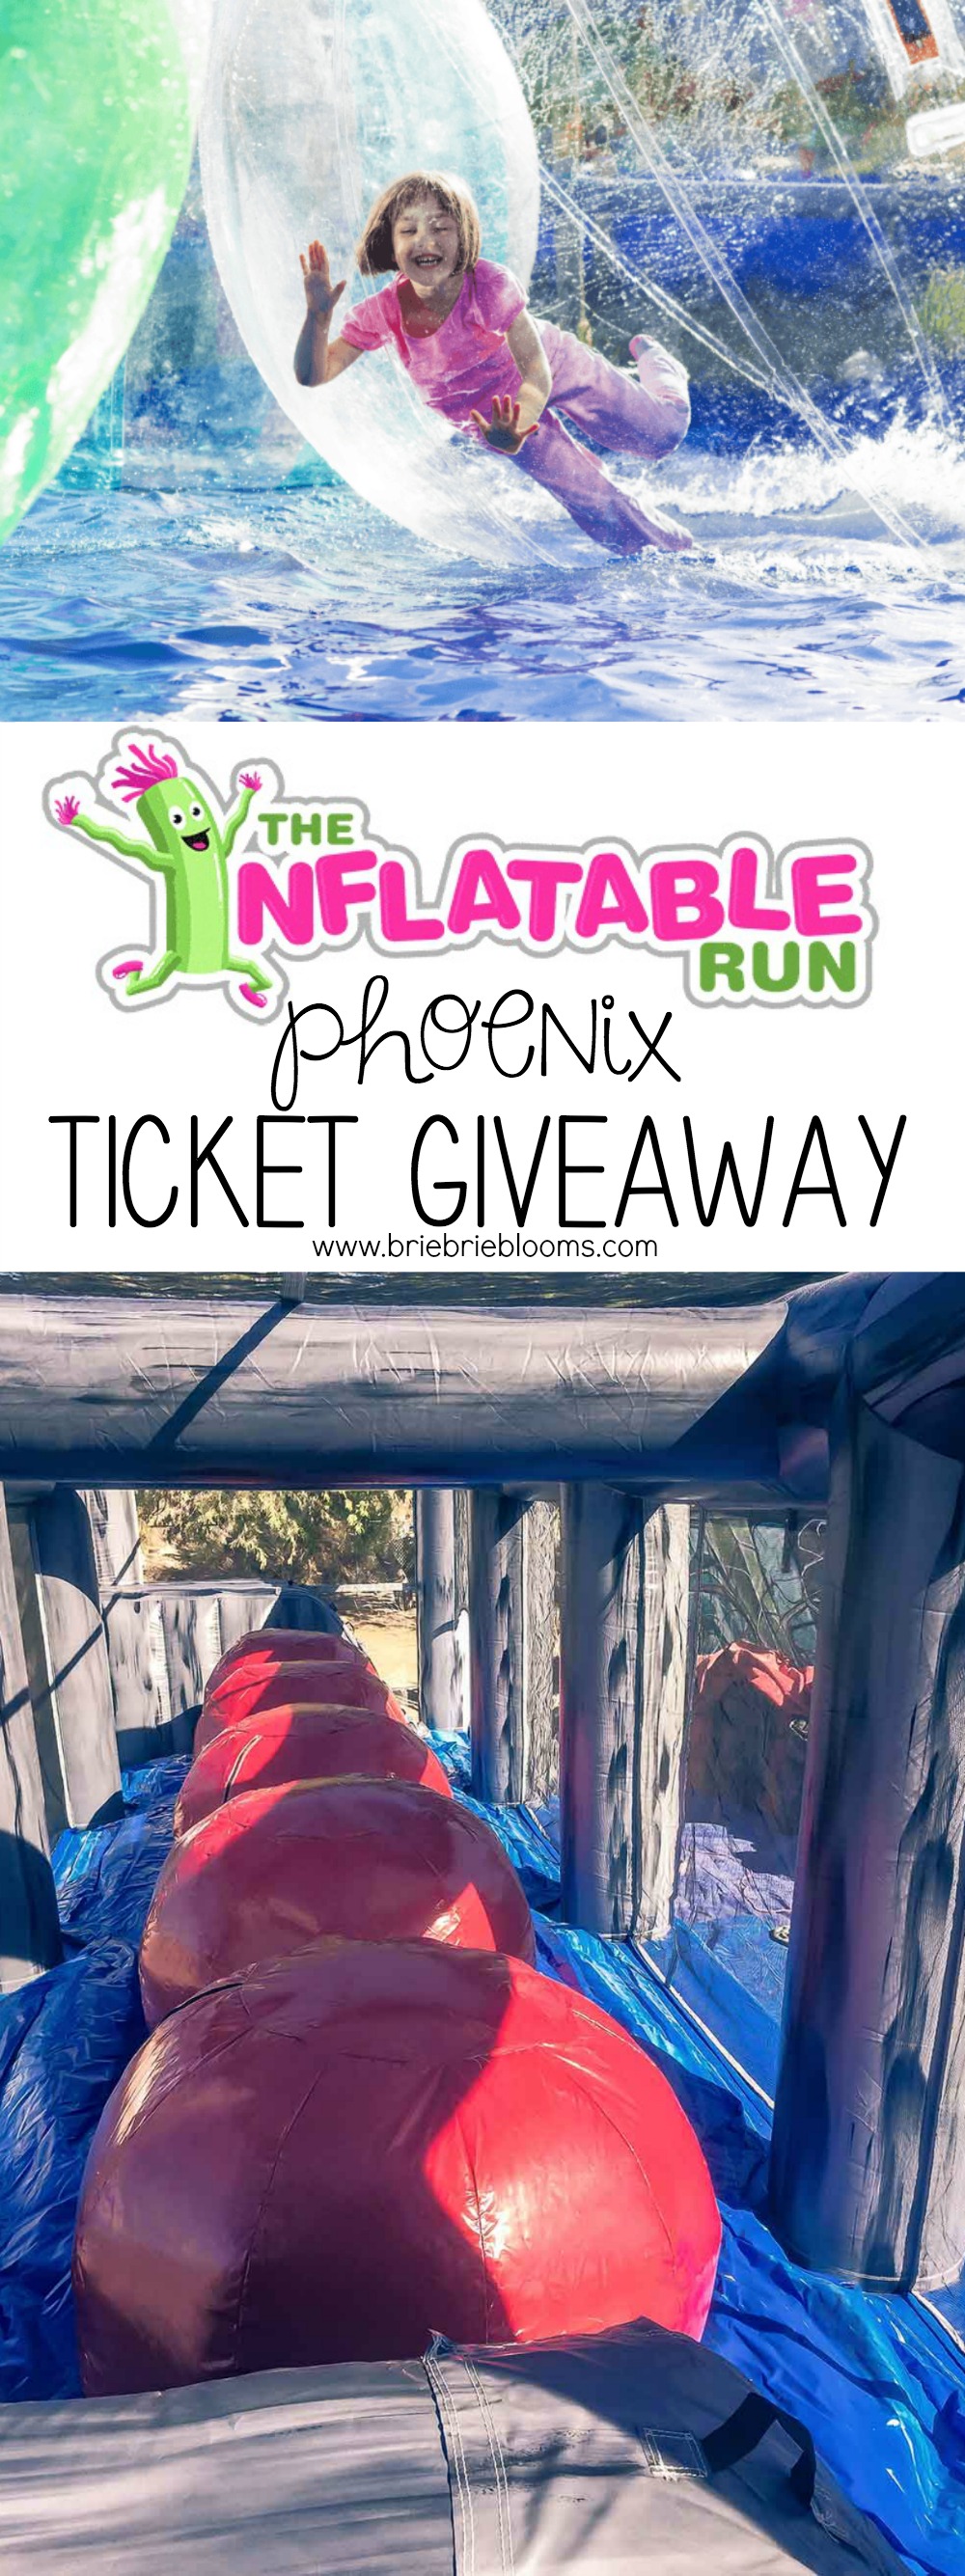 Enter to win The Inflatable Run Phoenix Ticket Giveaway for an ultimate day of family fun!